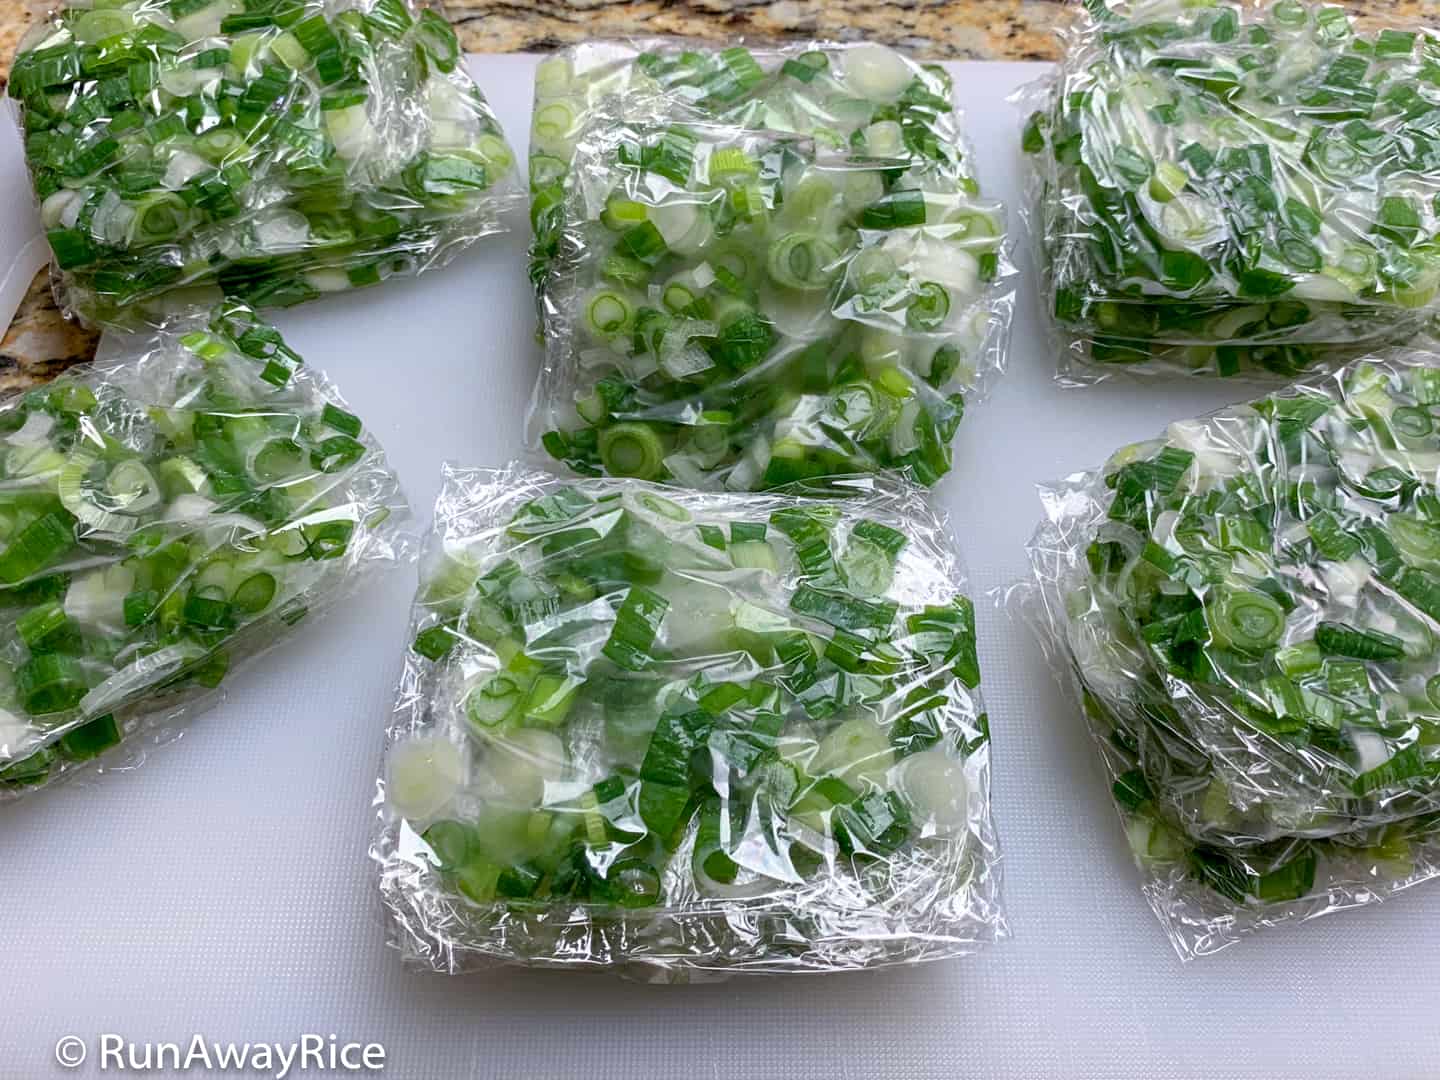 http://runawayrice.com/wp-content/uploads/2018/10/How-To-Freeze-Green-Onions-Small-Packets-.jpg